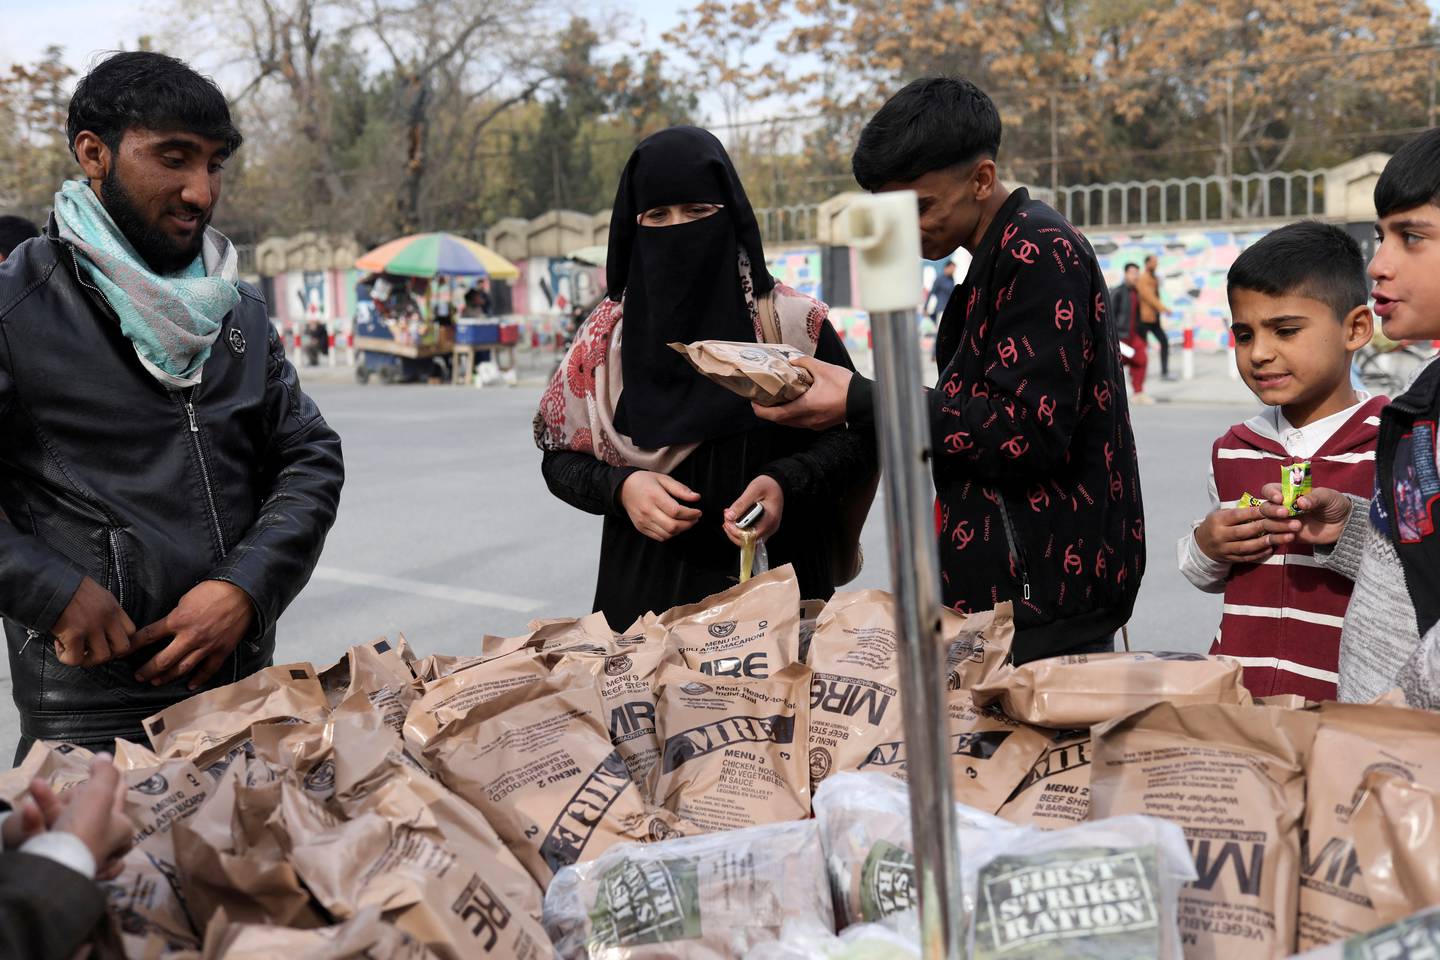 An Afghan woman buys food left behind by the US military from a peddler in Kabul, November 17. Reuters